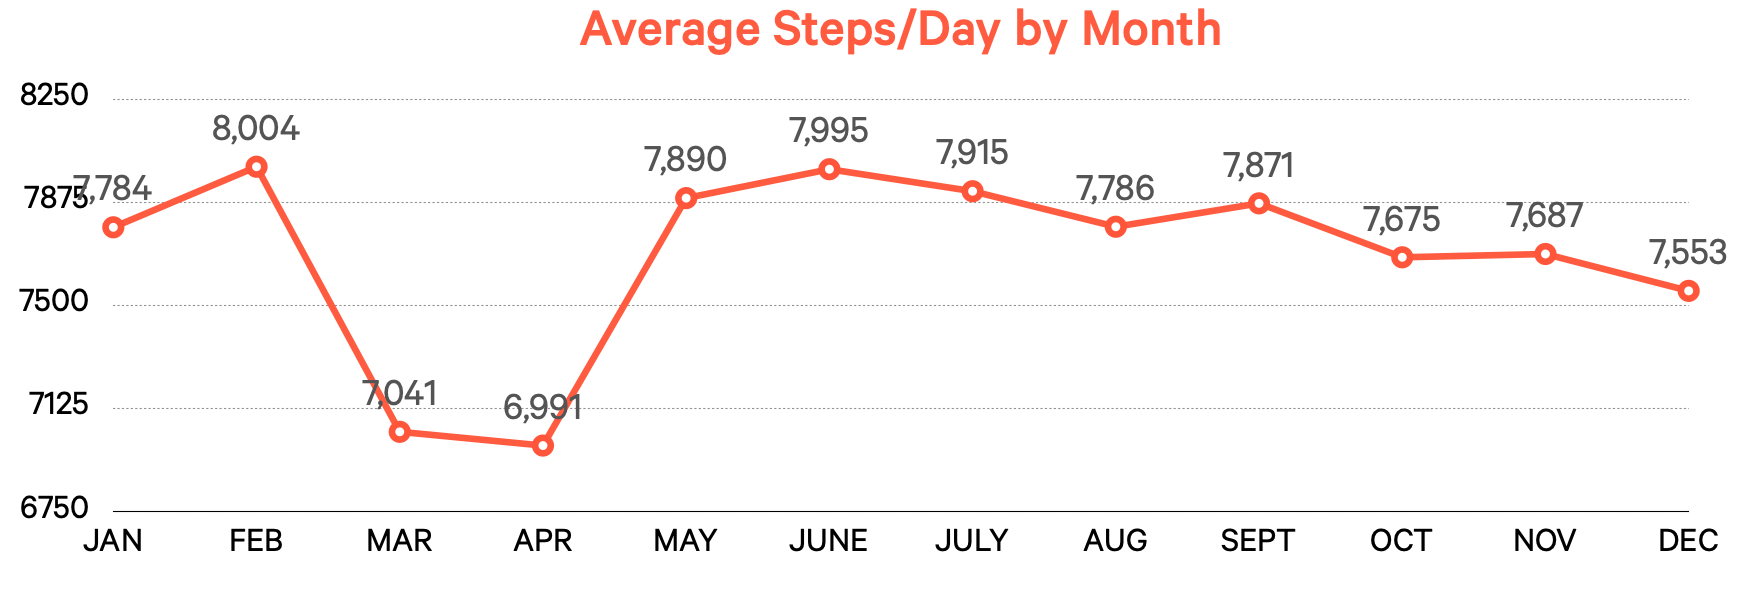 average step count by month graph